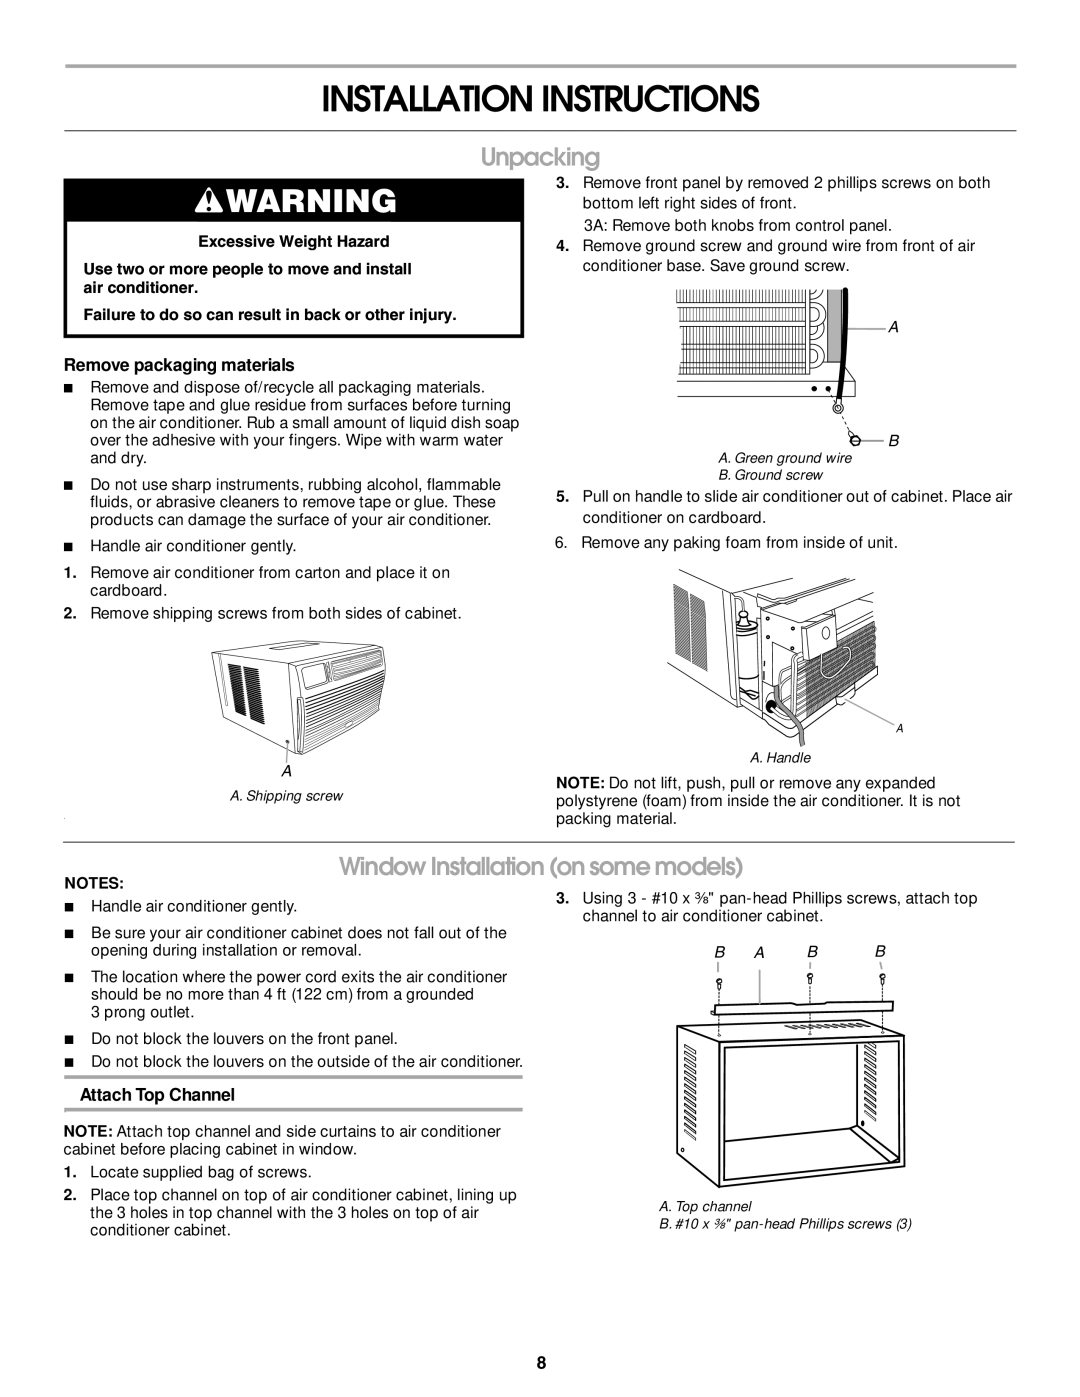 Soleus Air KC-30H / KC-35H installation manual Installation Instructions, Unpacking, Window Installation on some models 